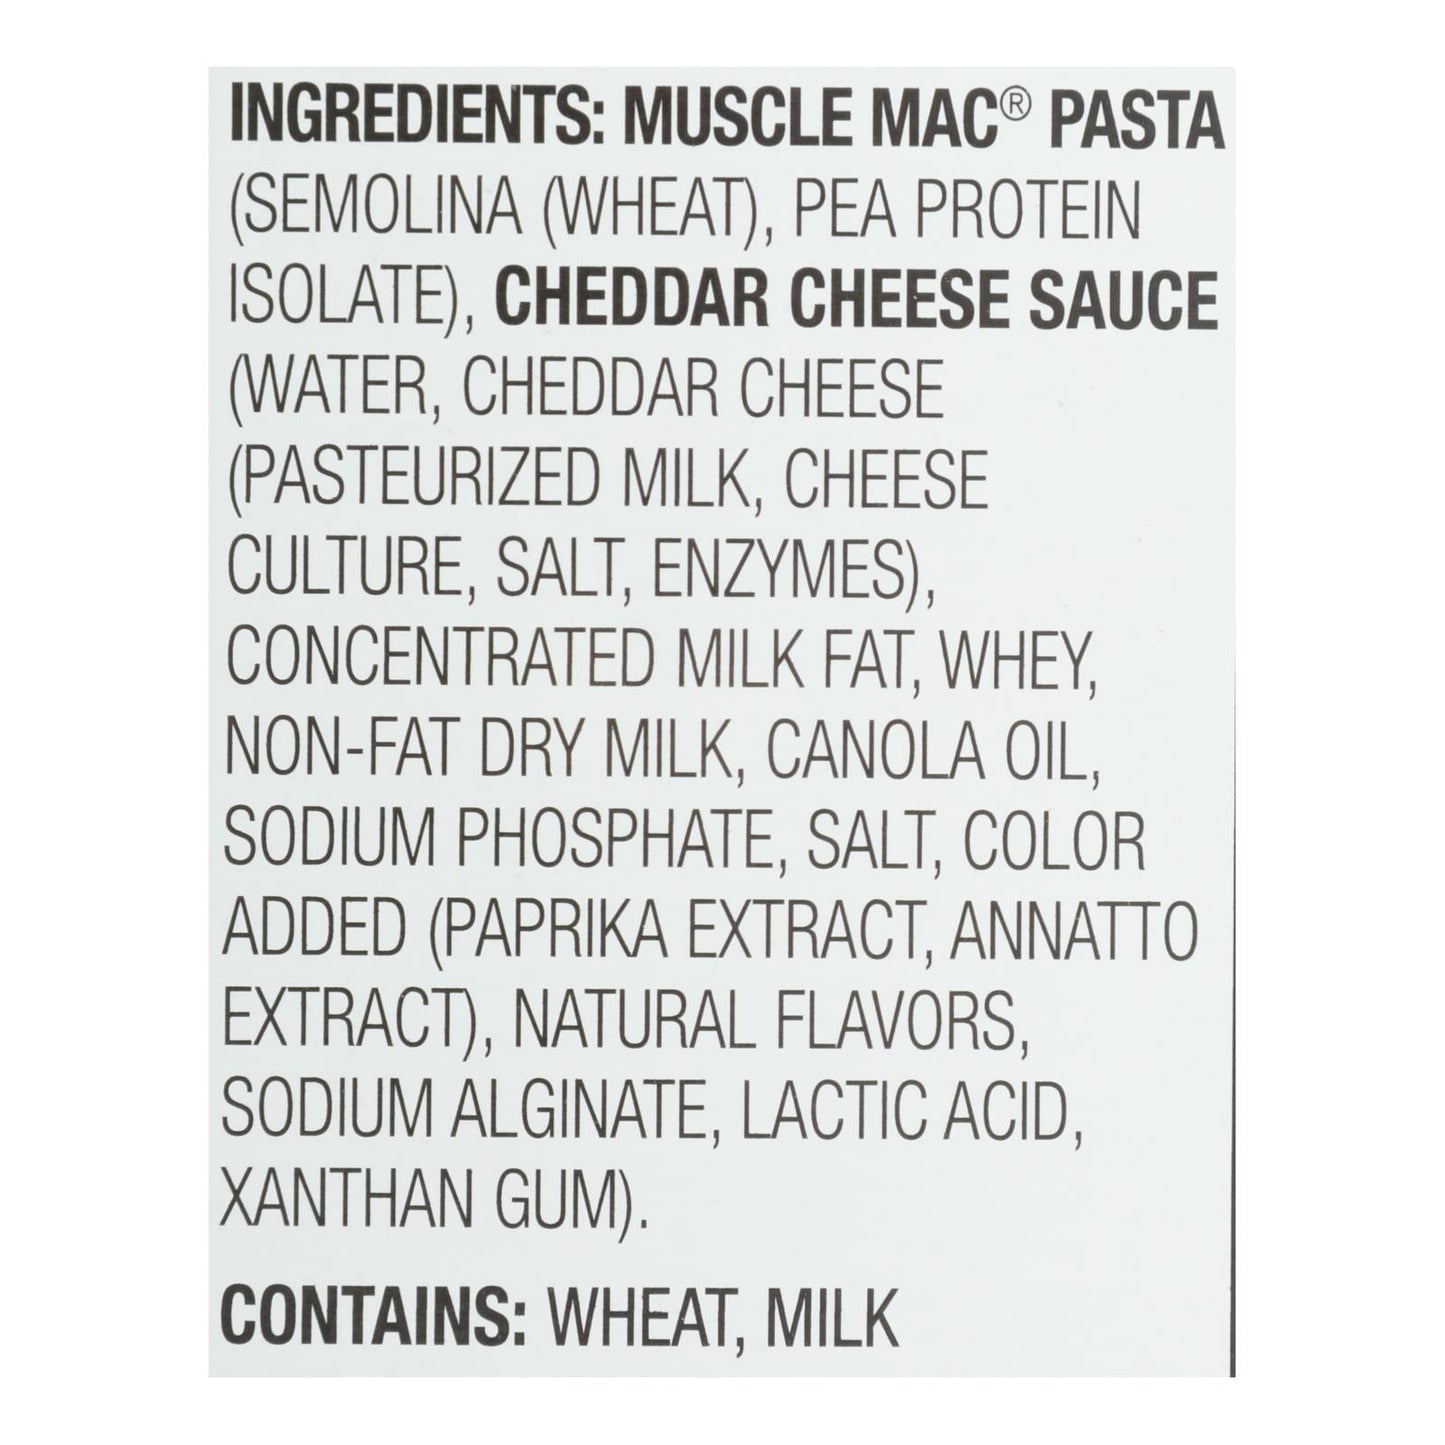 Muscle Mac High Protein Shells & Cheese  - Case Of 12 - 11 Oz